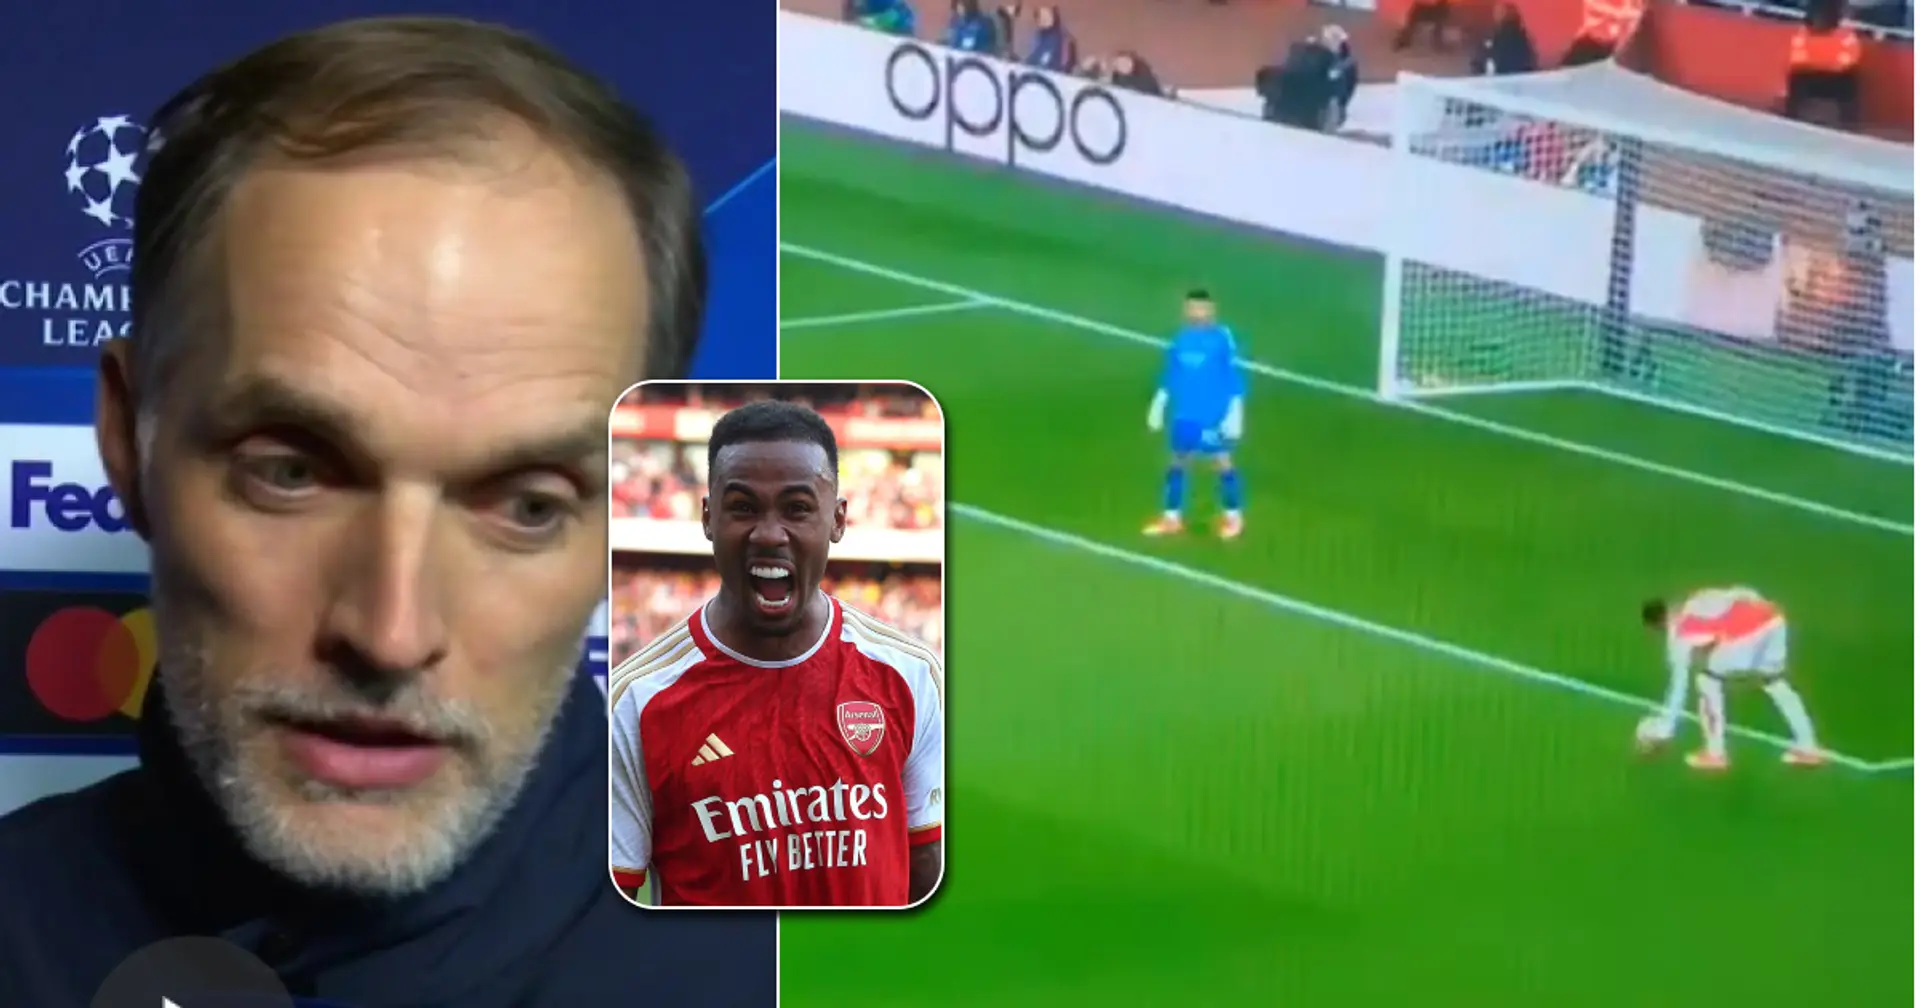 'We feel angry': Tuchel fumes at referee for denying penalty after Gabriel's strange handball in Arsenal's box